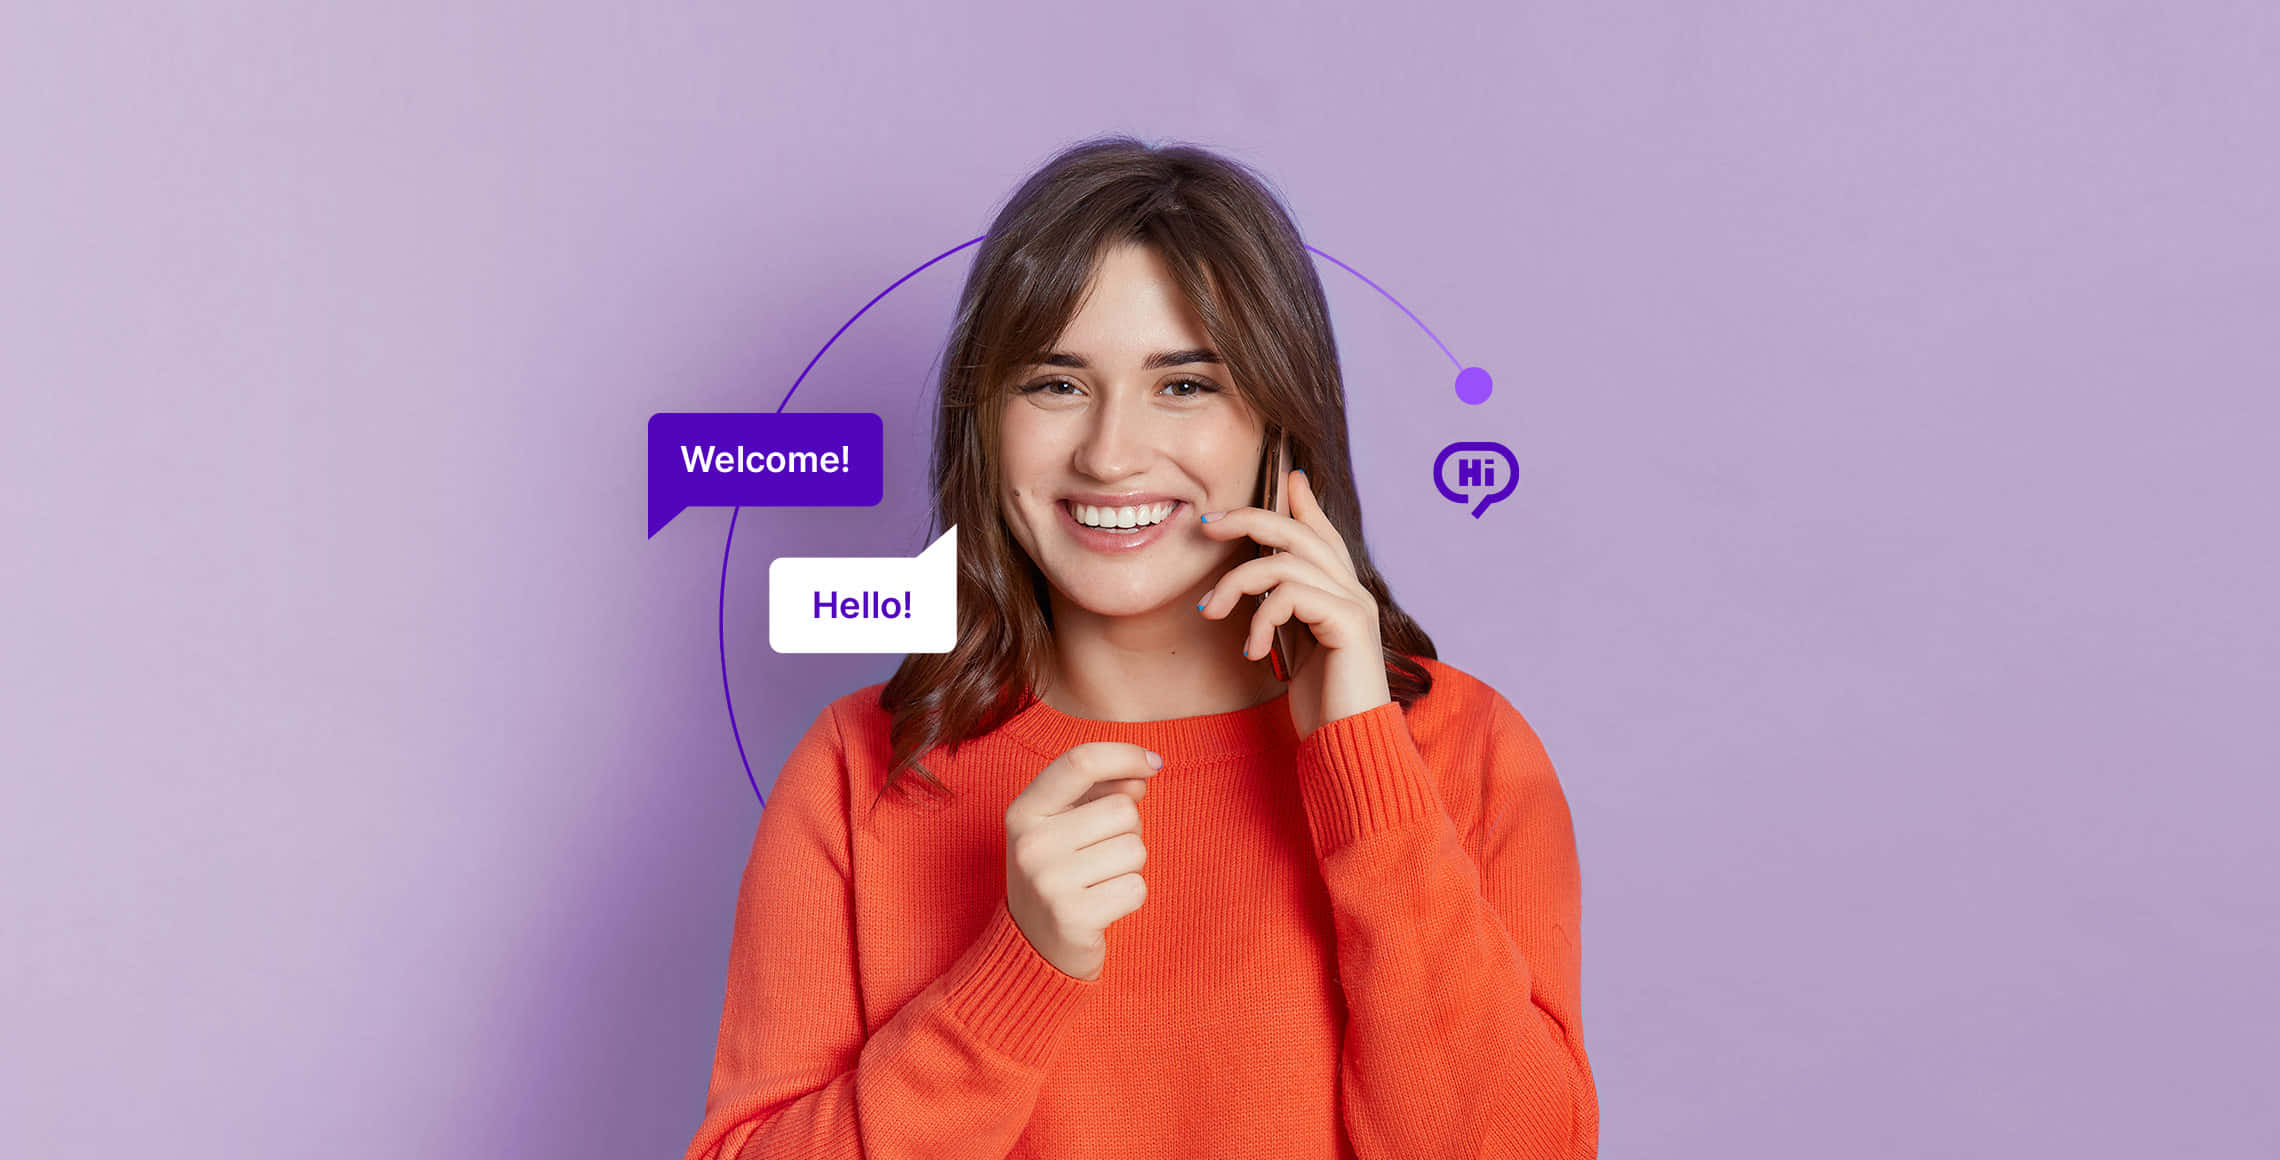 A Woman Is Talking On The Phone With A Purple Background